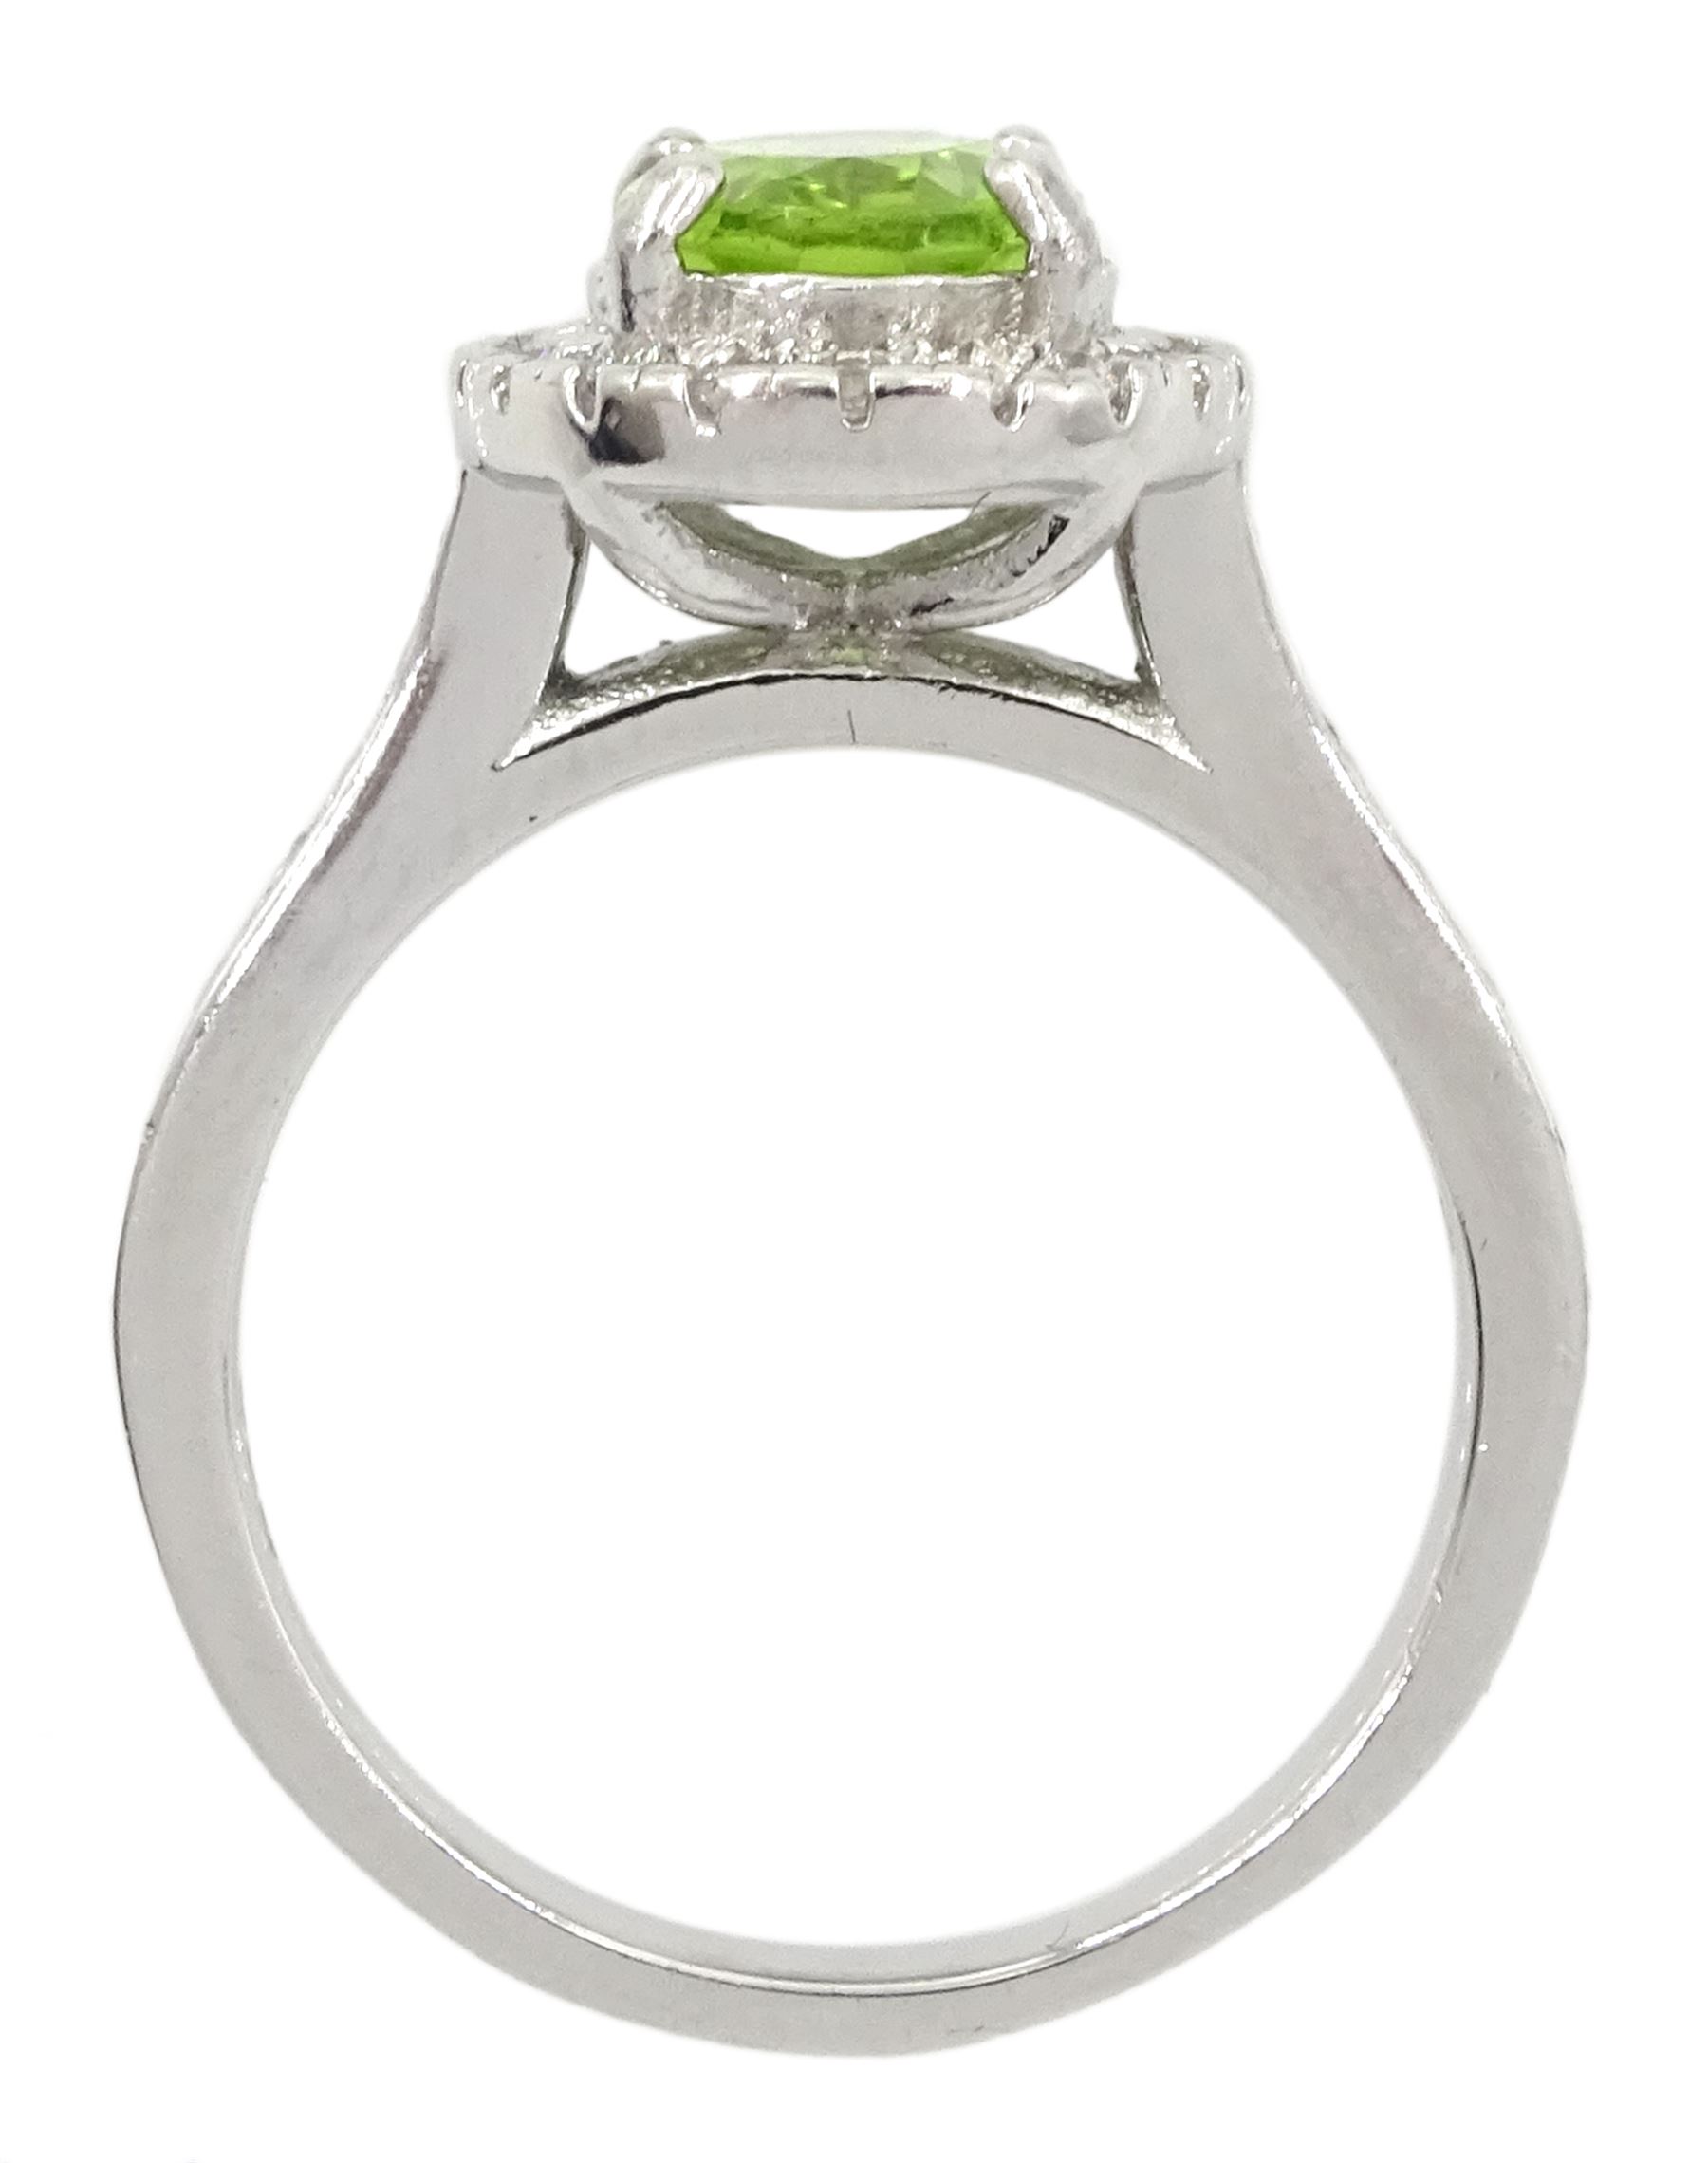 Silver oval peridot and cubic zirconia ring - Image 4 of 4